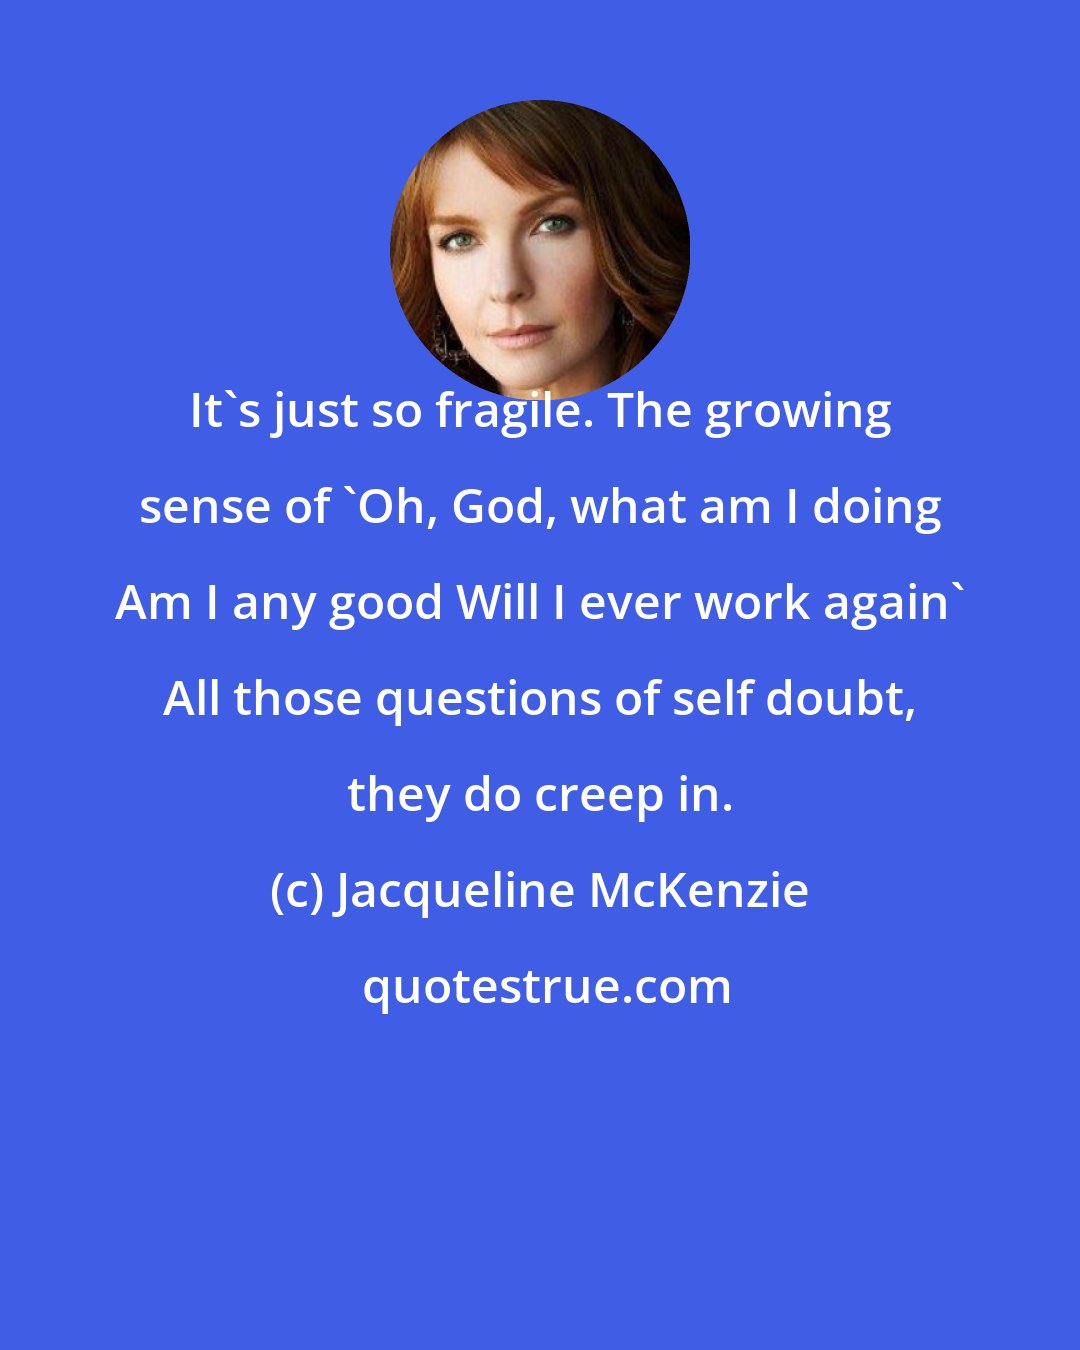 Jacqueline McKenzie: It's just so fragile. The growing sense of 'Oh, God, what am I doing Am I any good Will I ever work again' All those questions of self doubt, they do creep in.